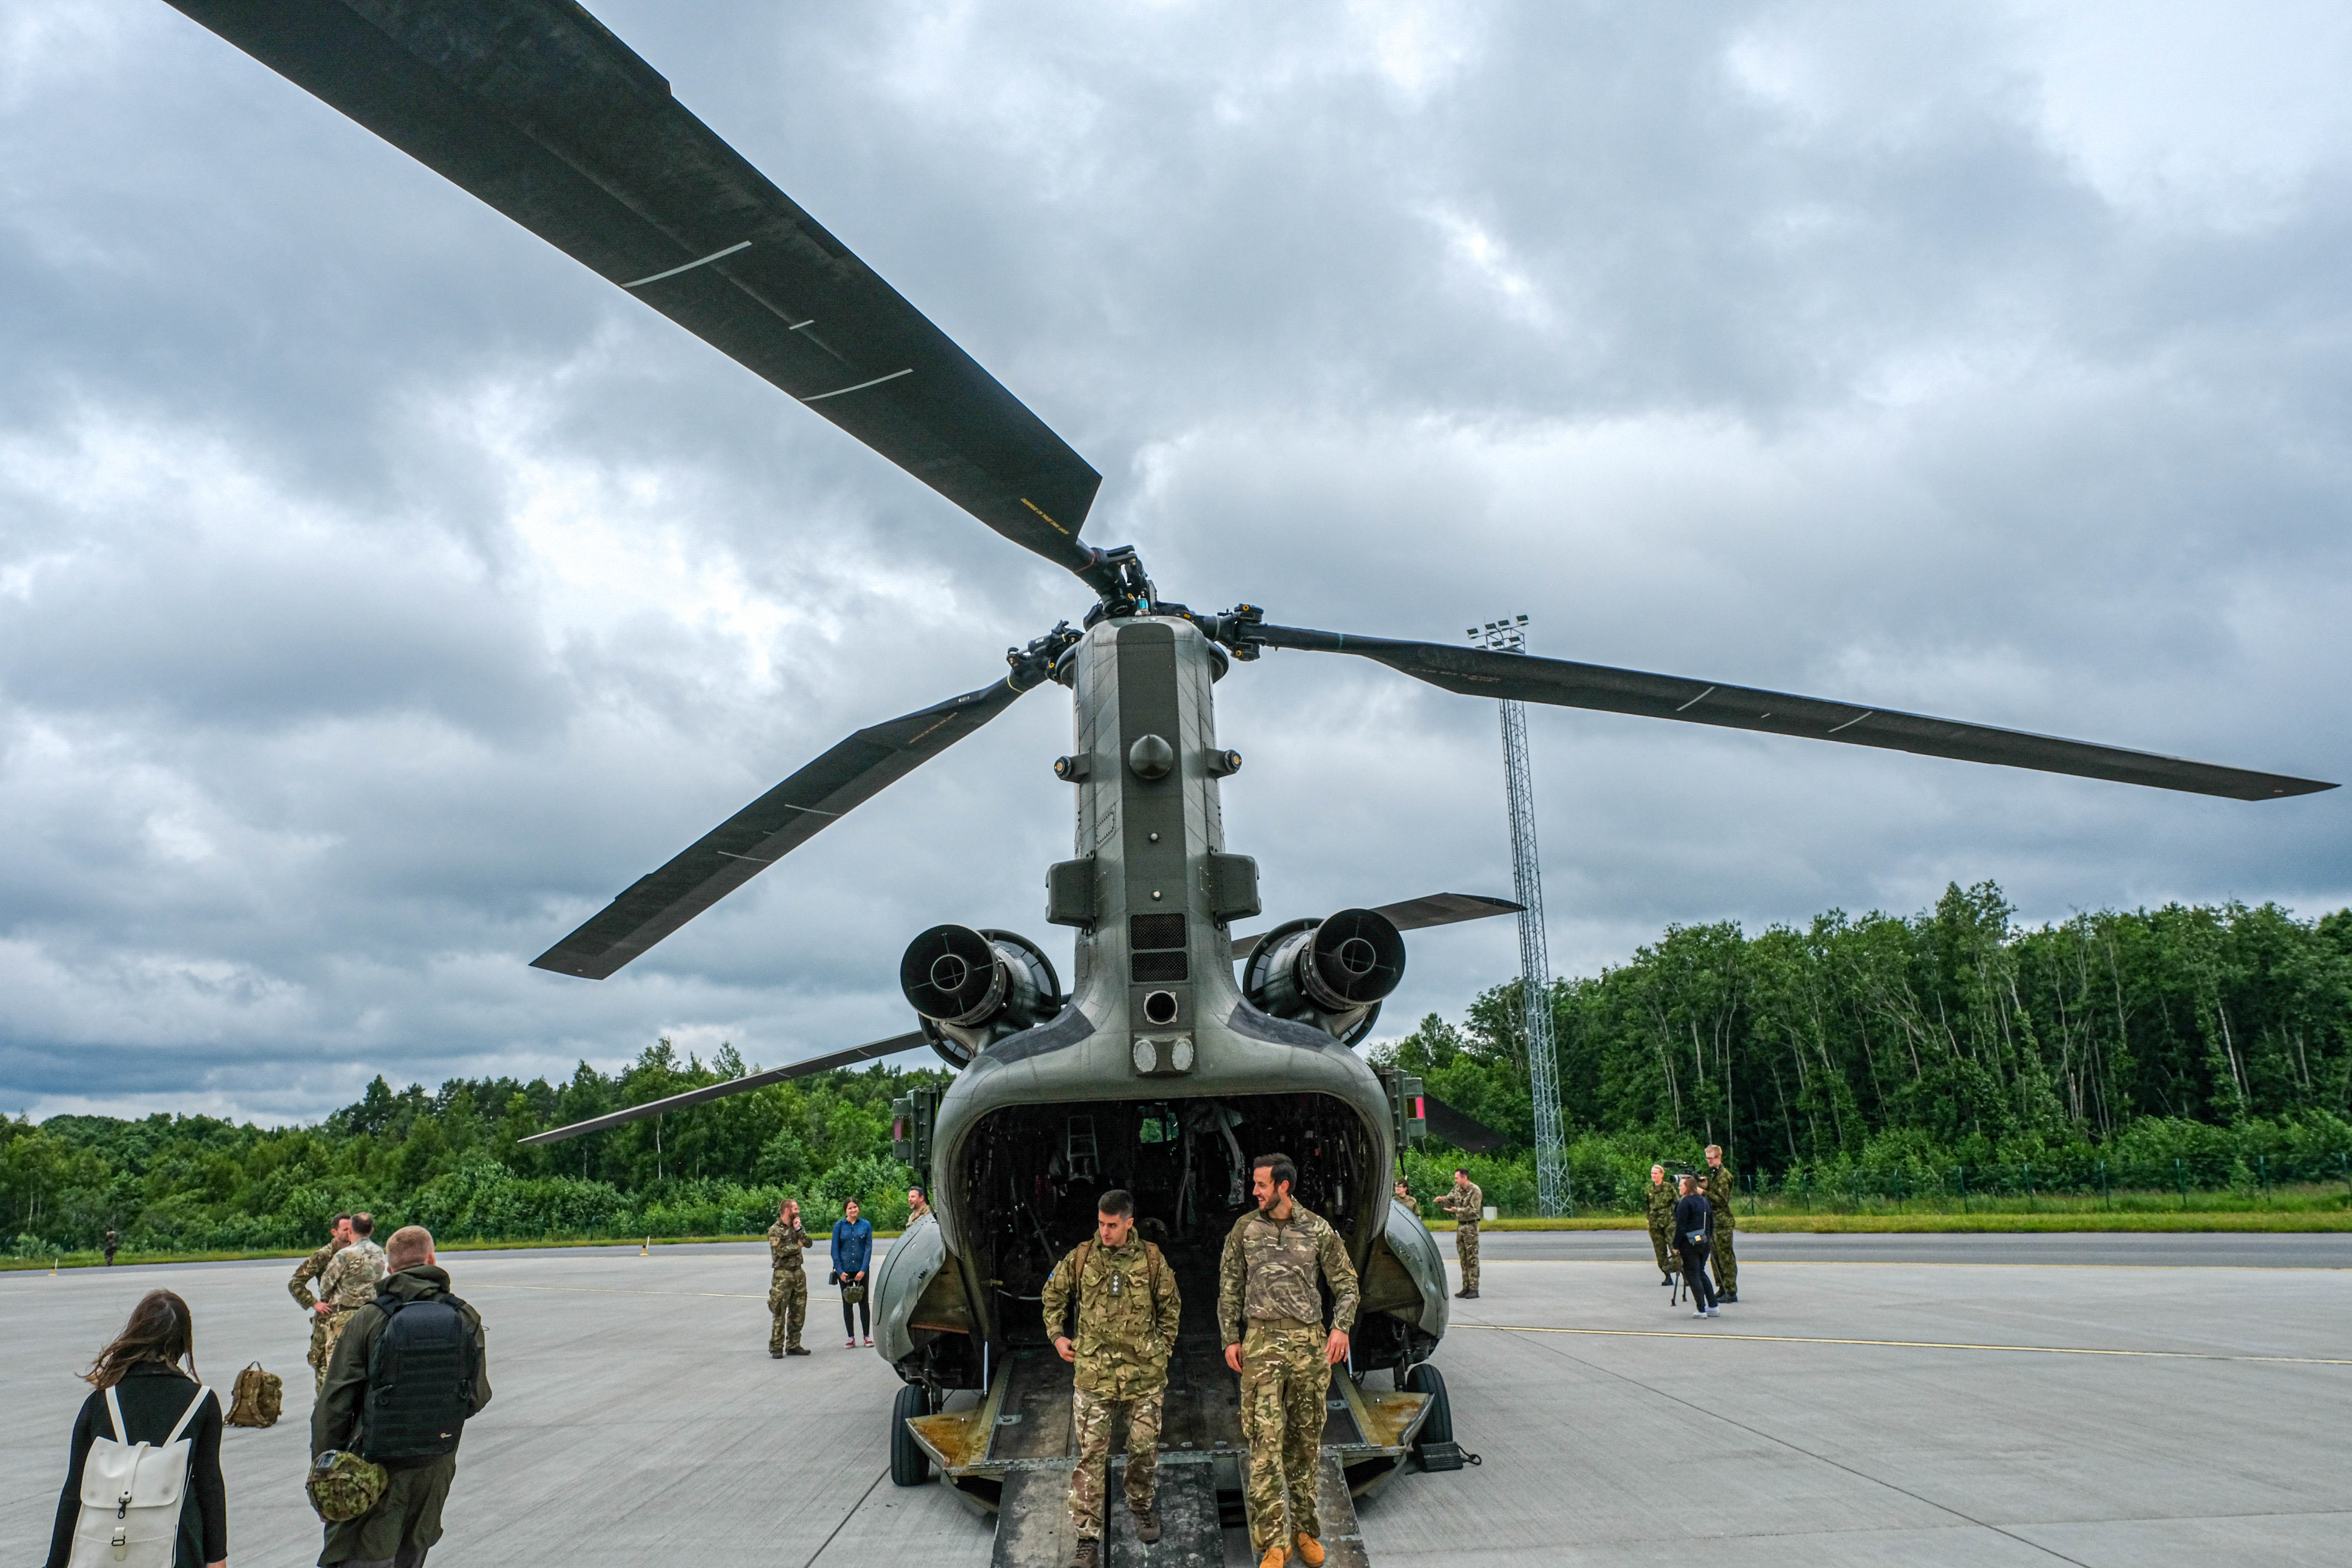 Image shows RAF Regiment aviators standing by the open loading bay of a RAF Chinook on the airfield.